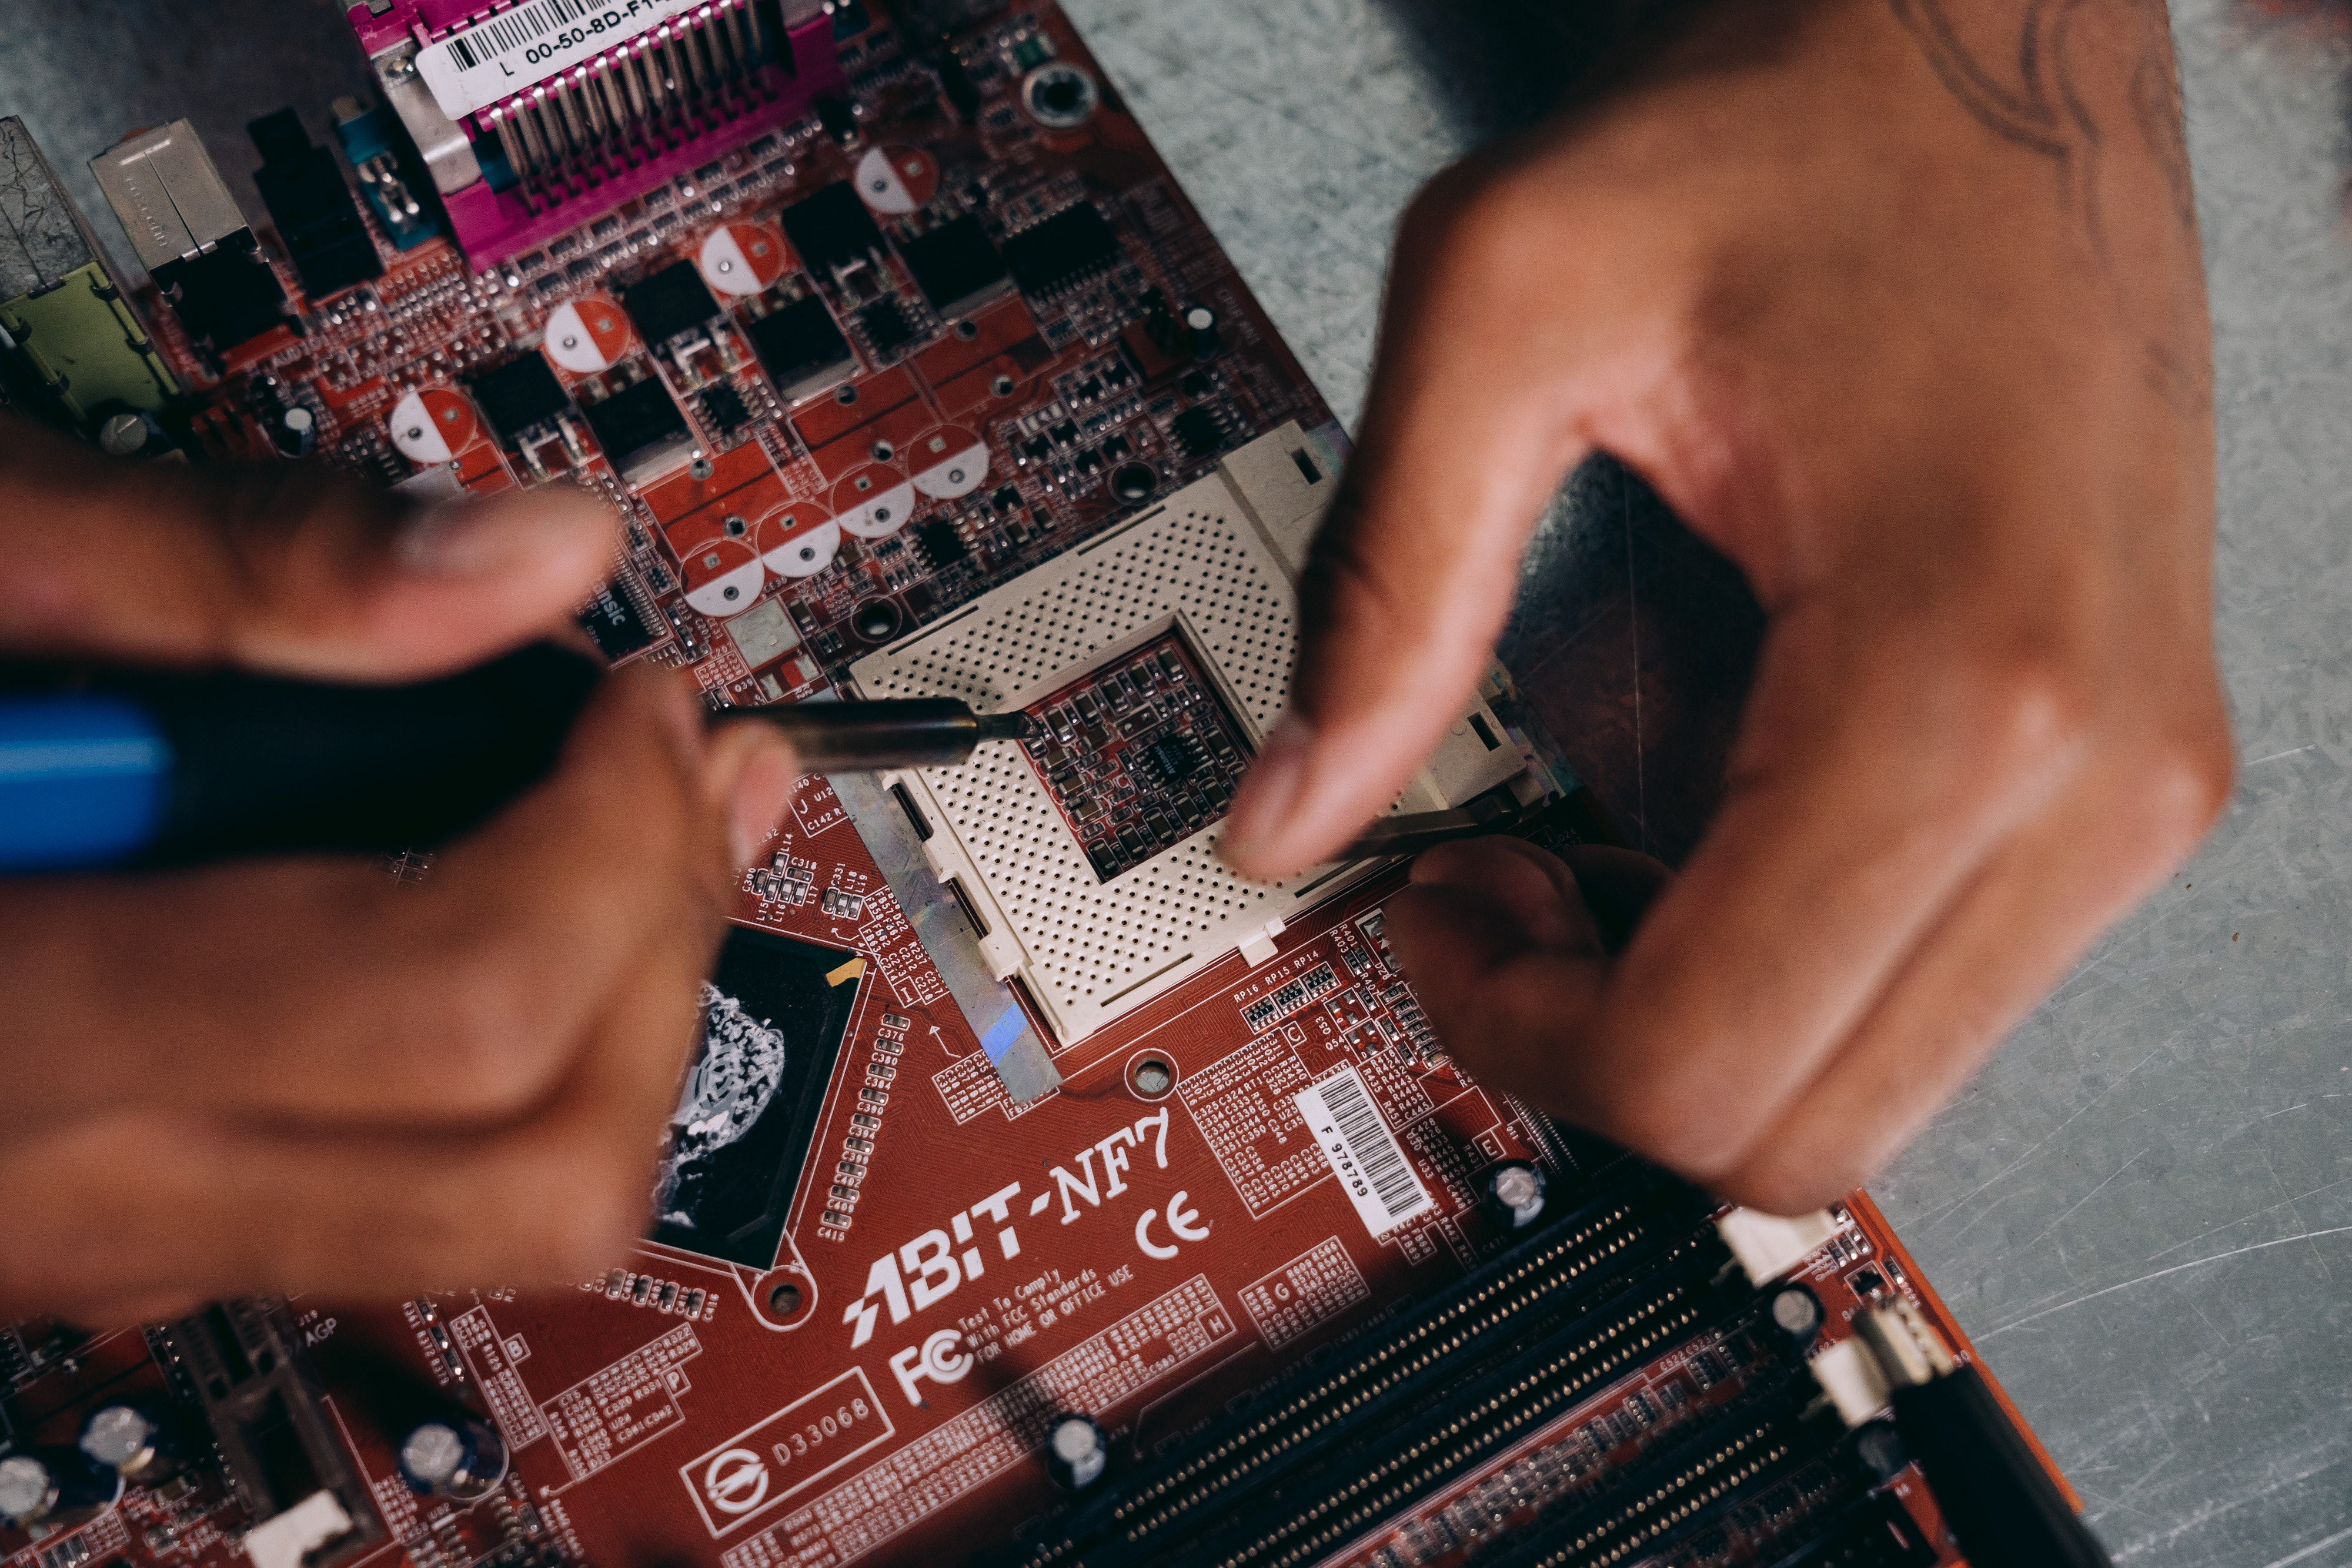 a man working on a motherboard